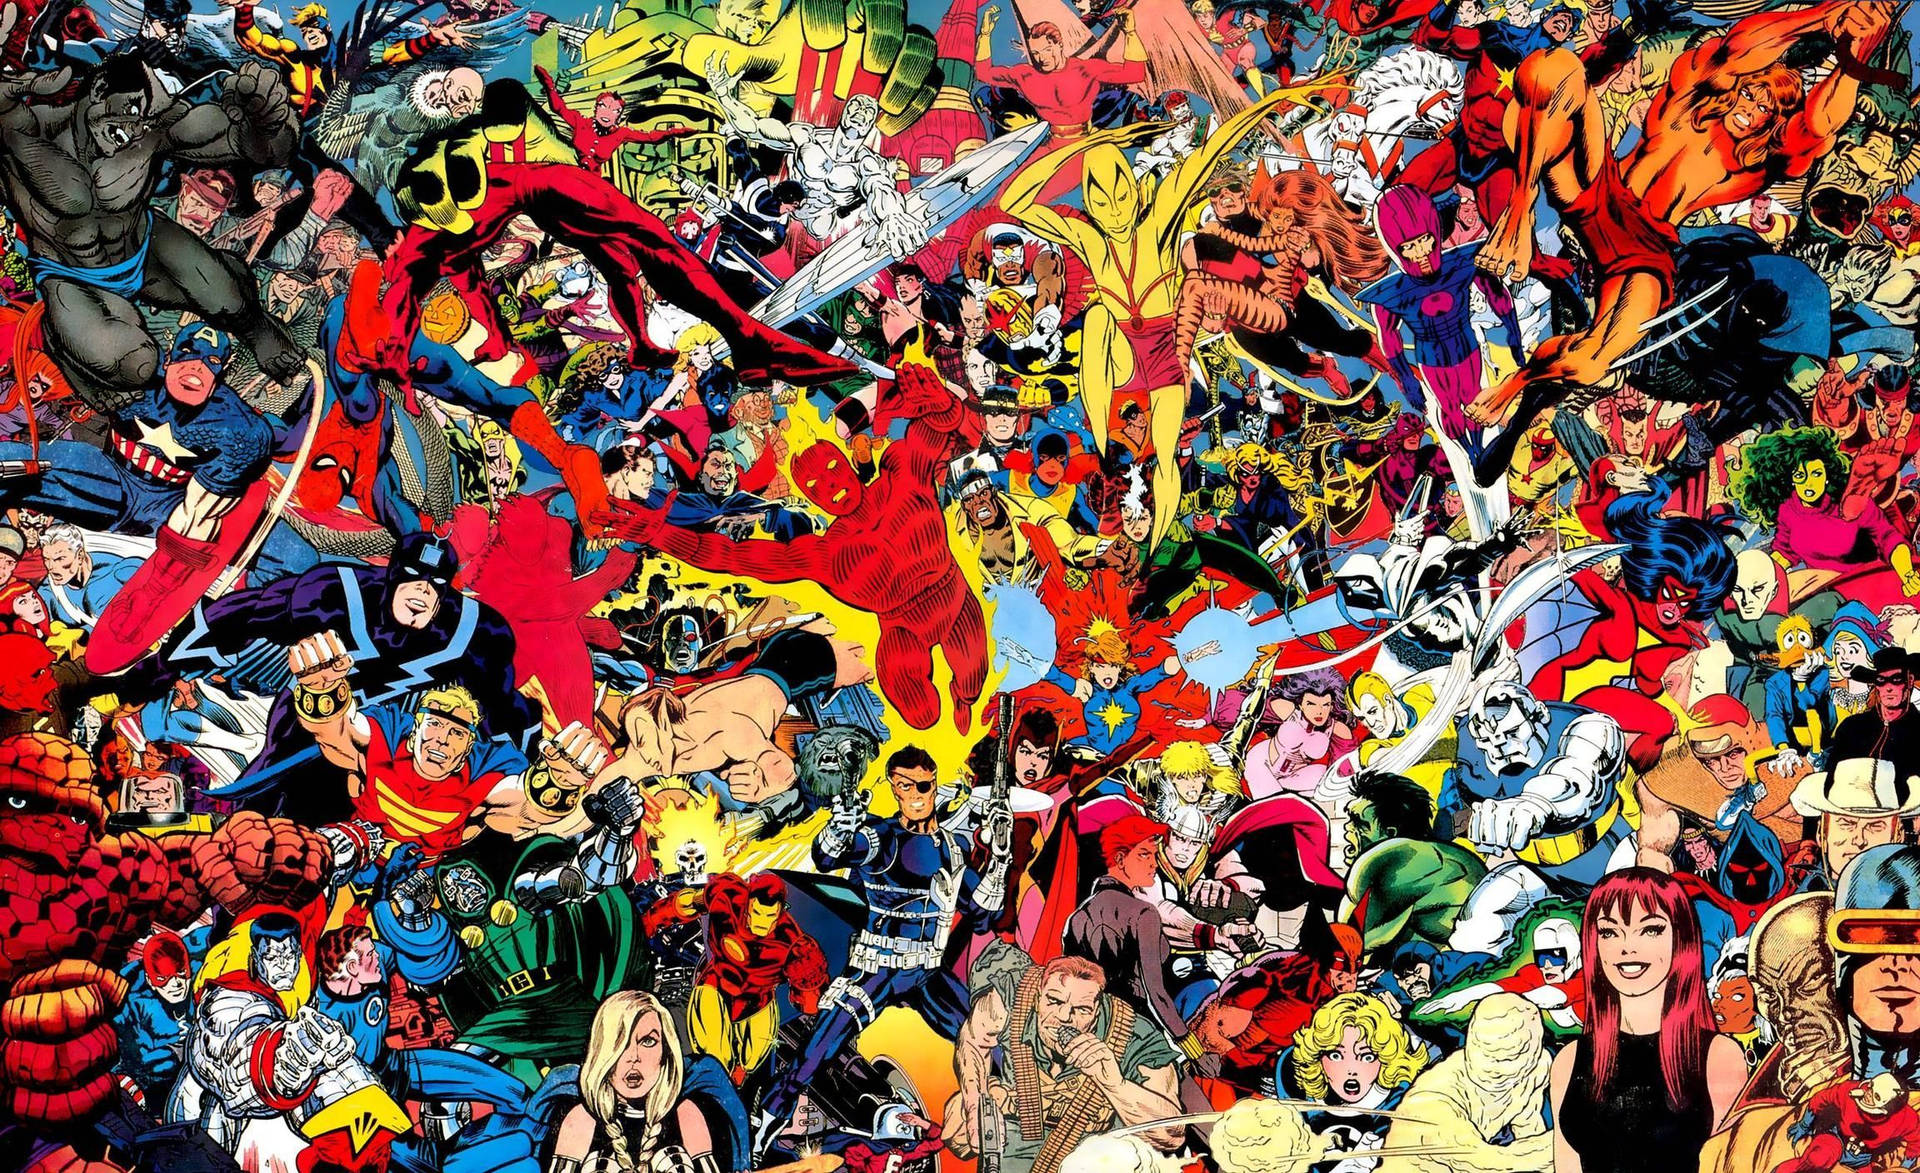 Classic Marvel comics with all the superheroes in one colorful theme.